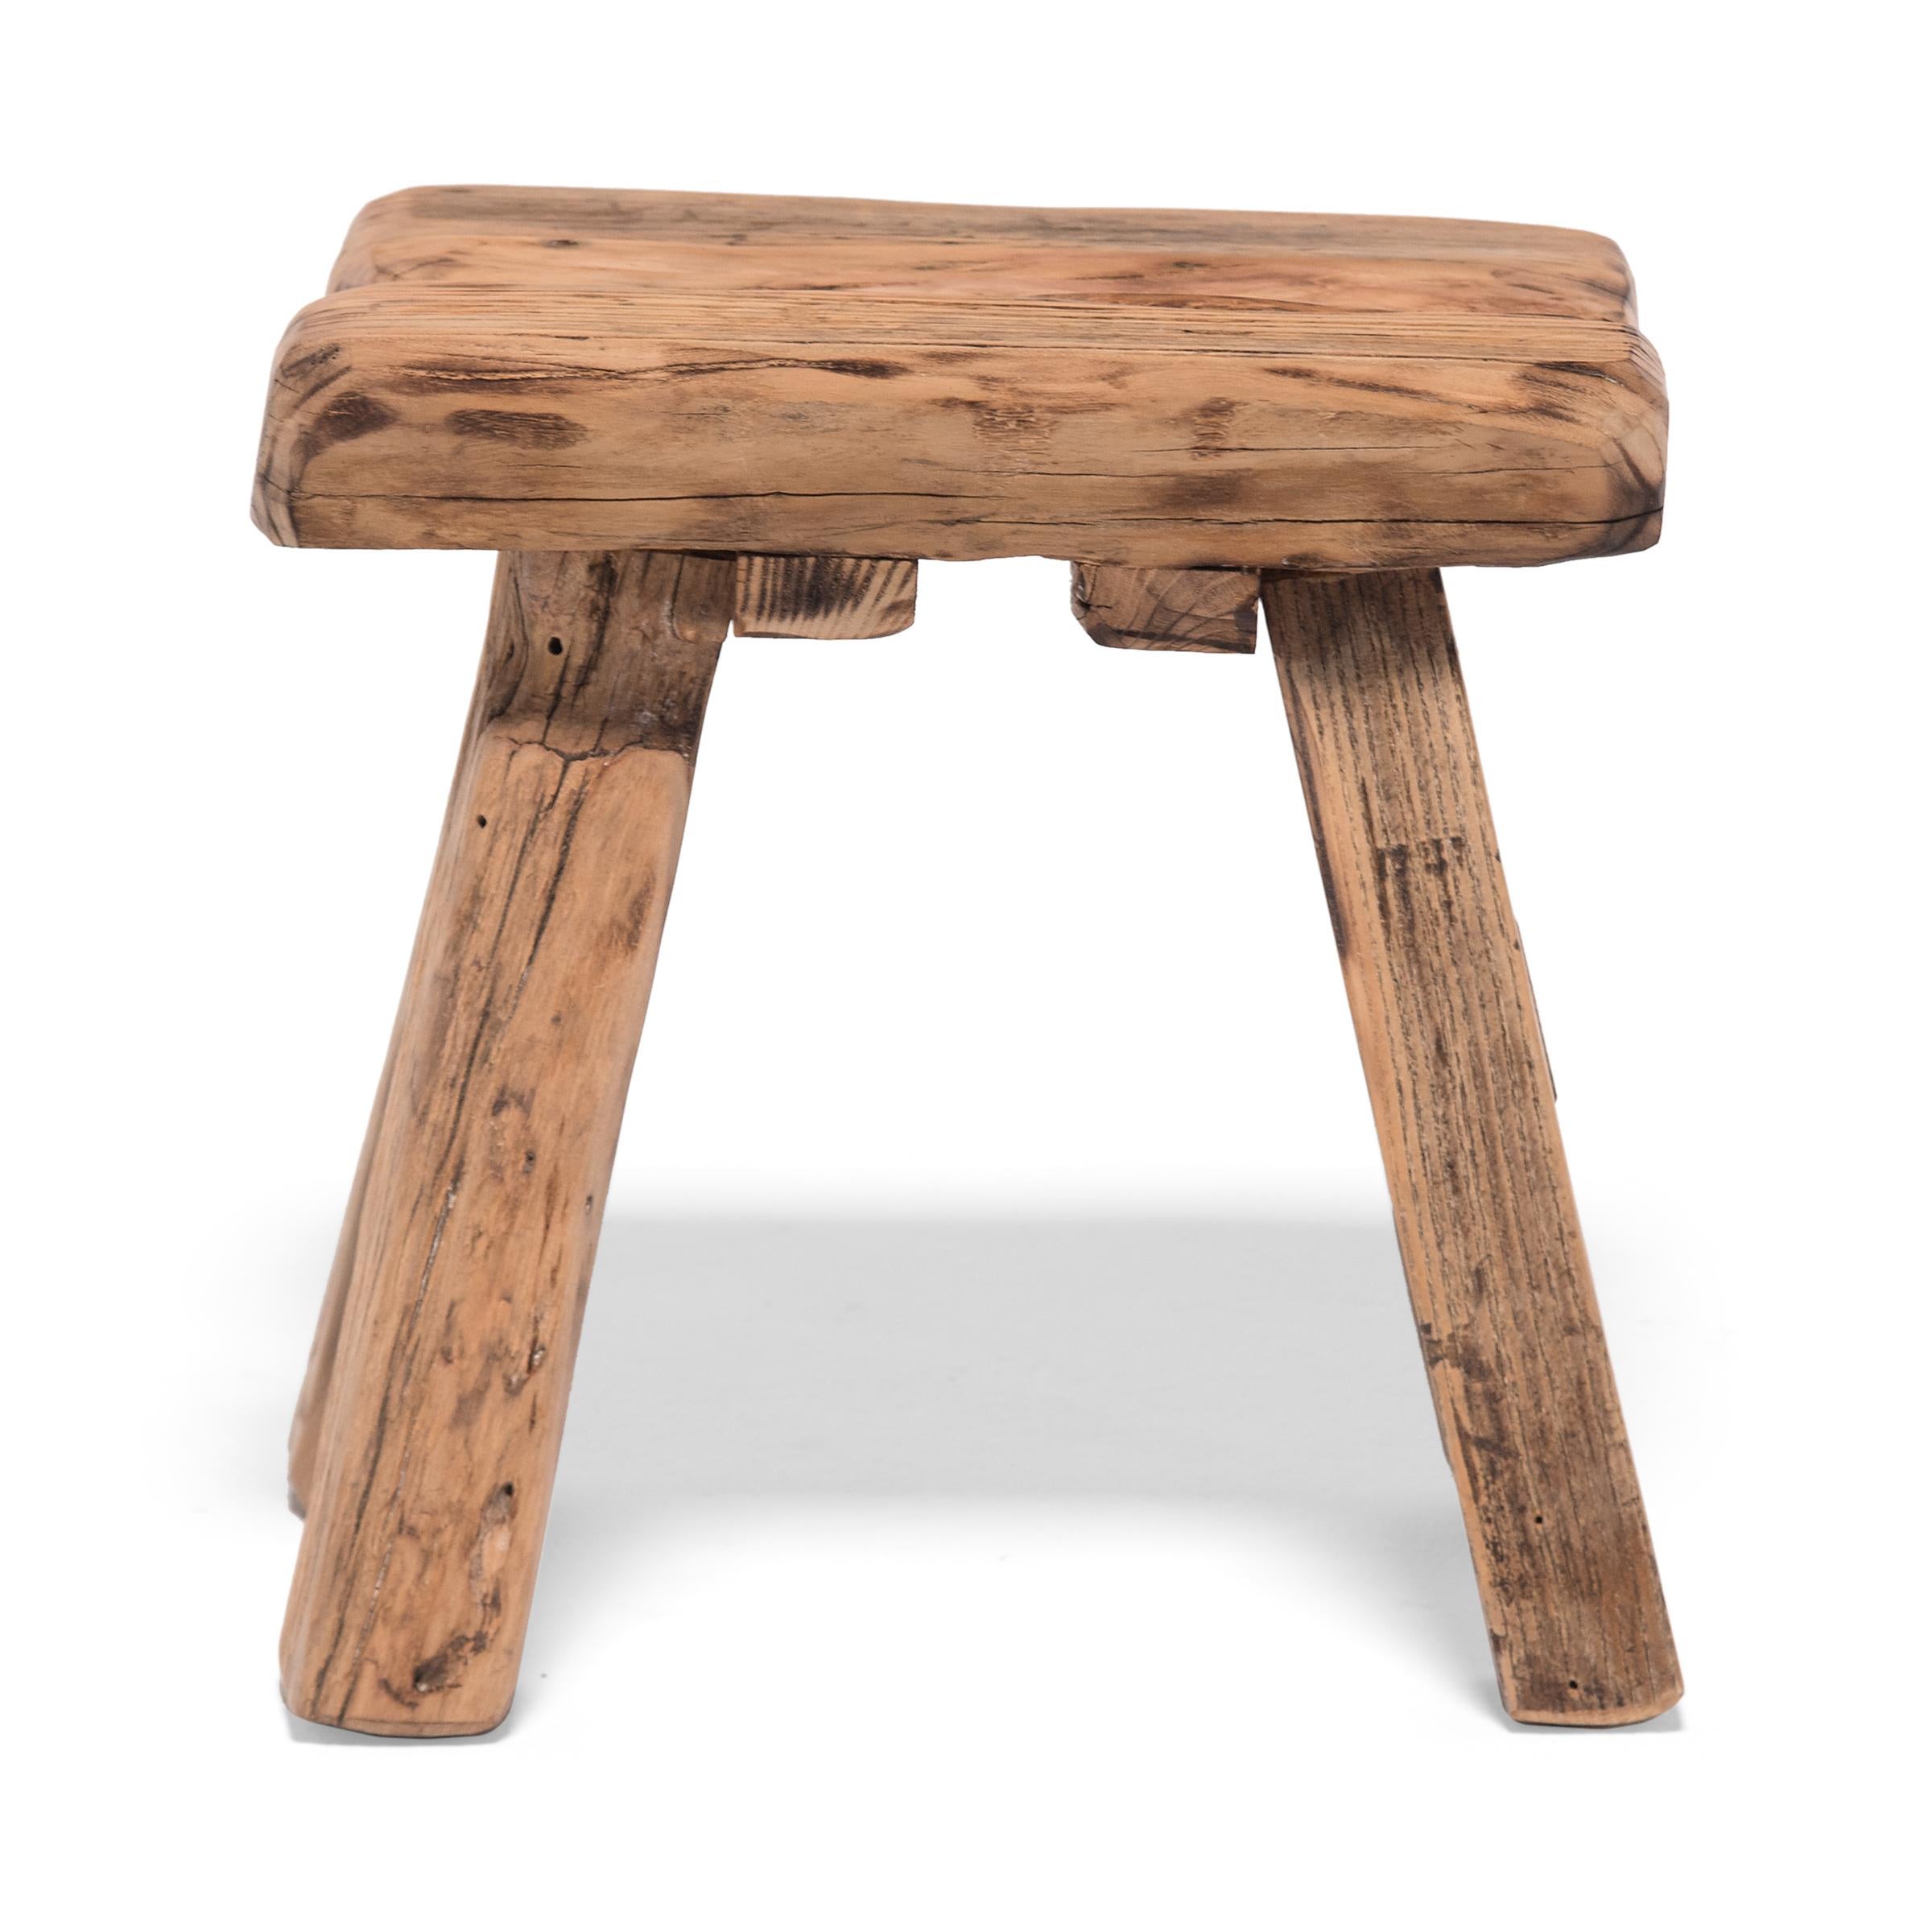 Chinese Reclaimed Elm Square Stool